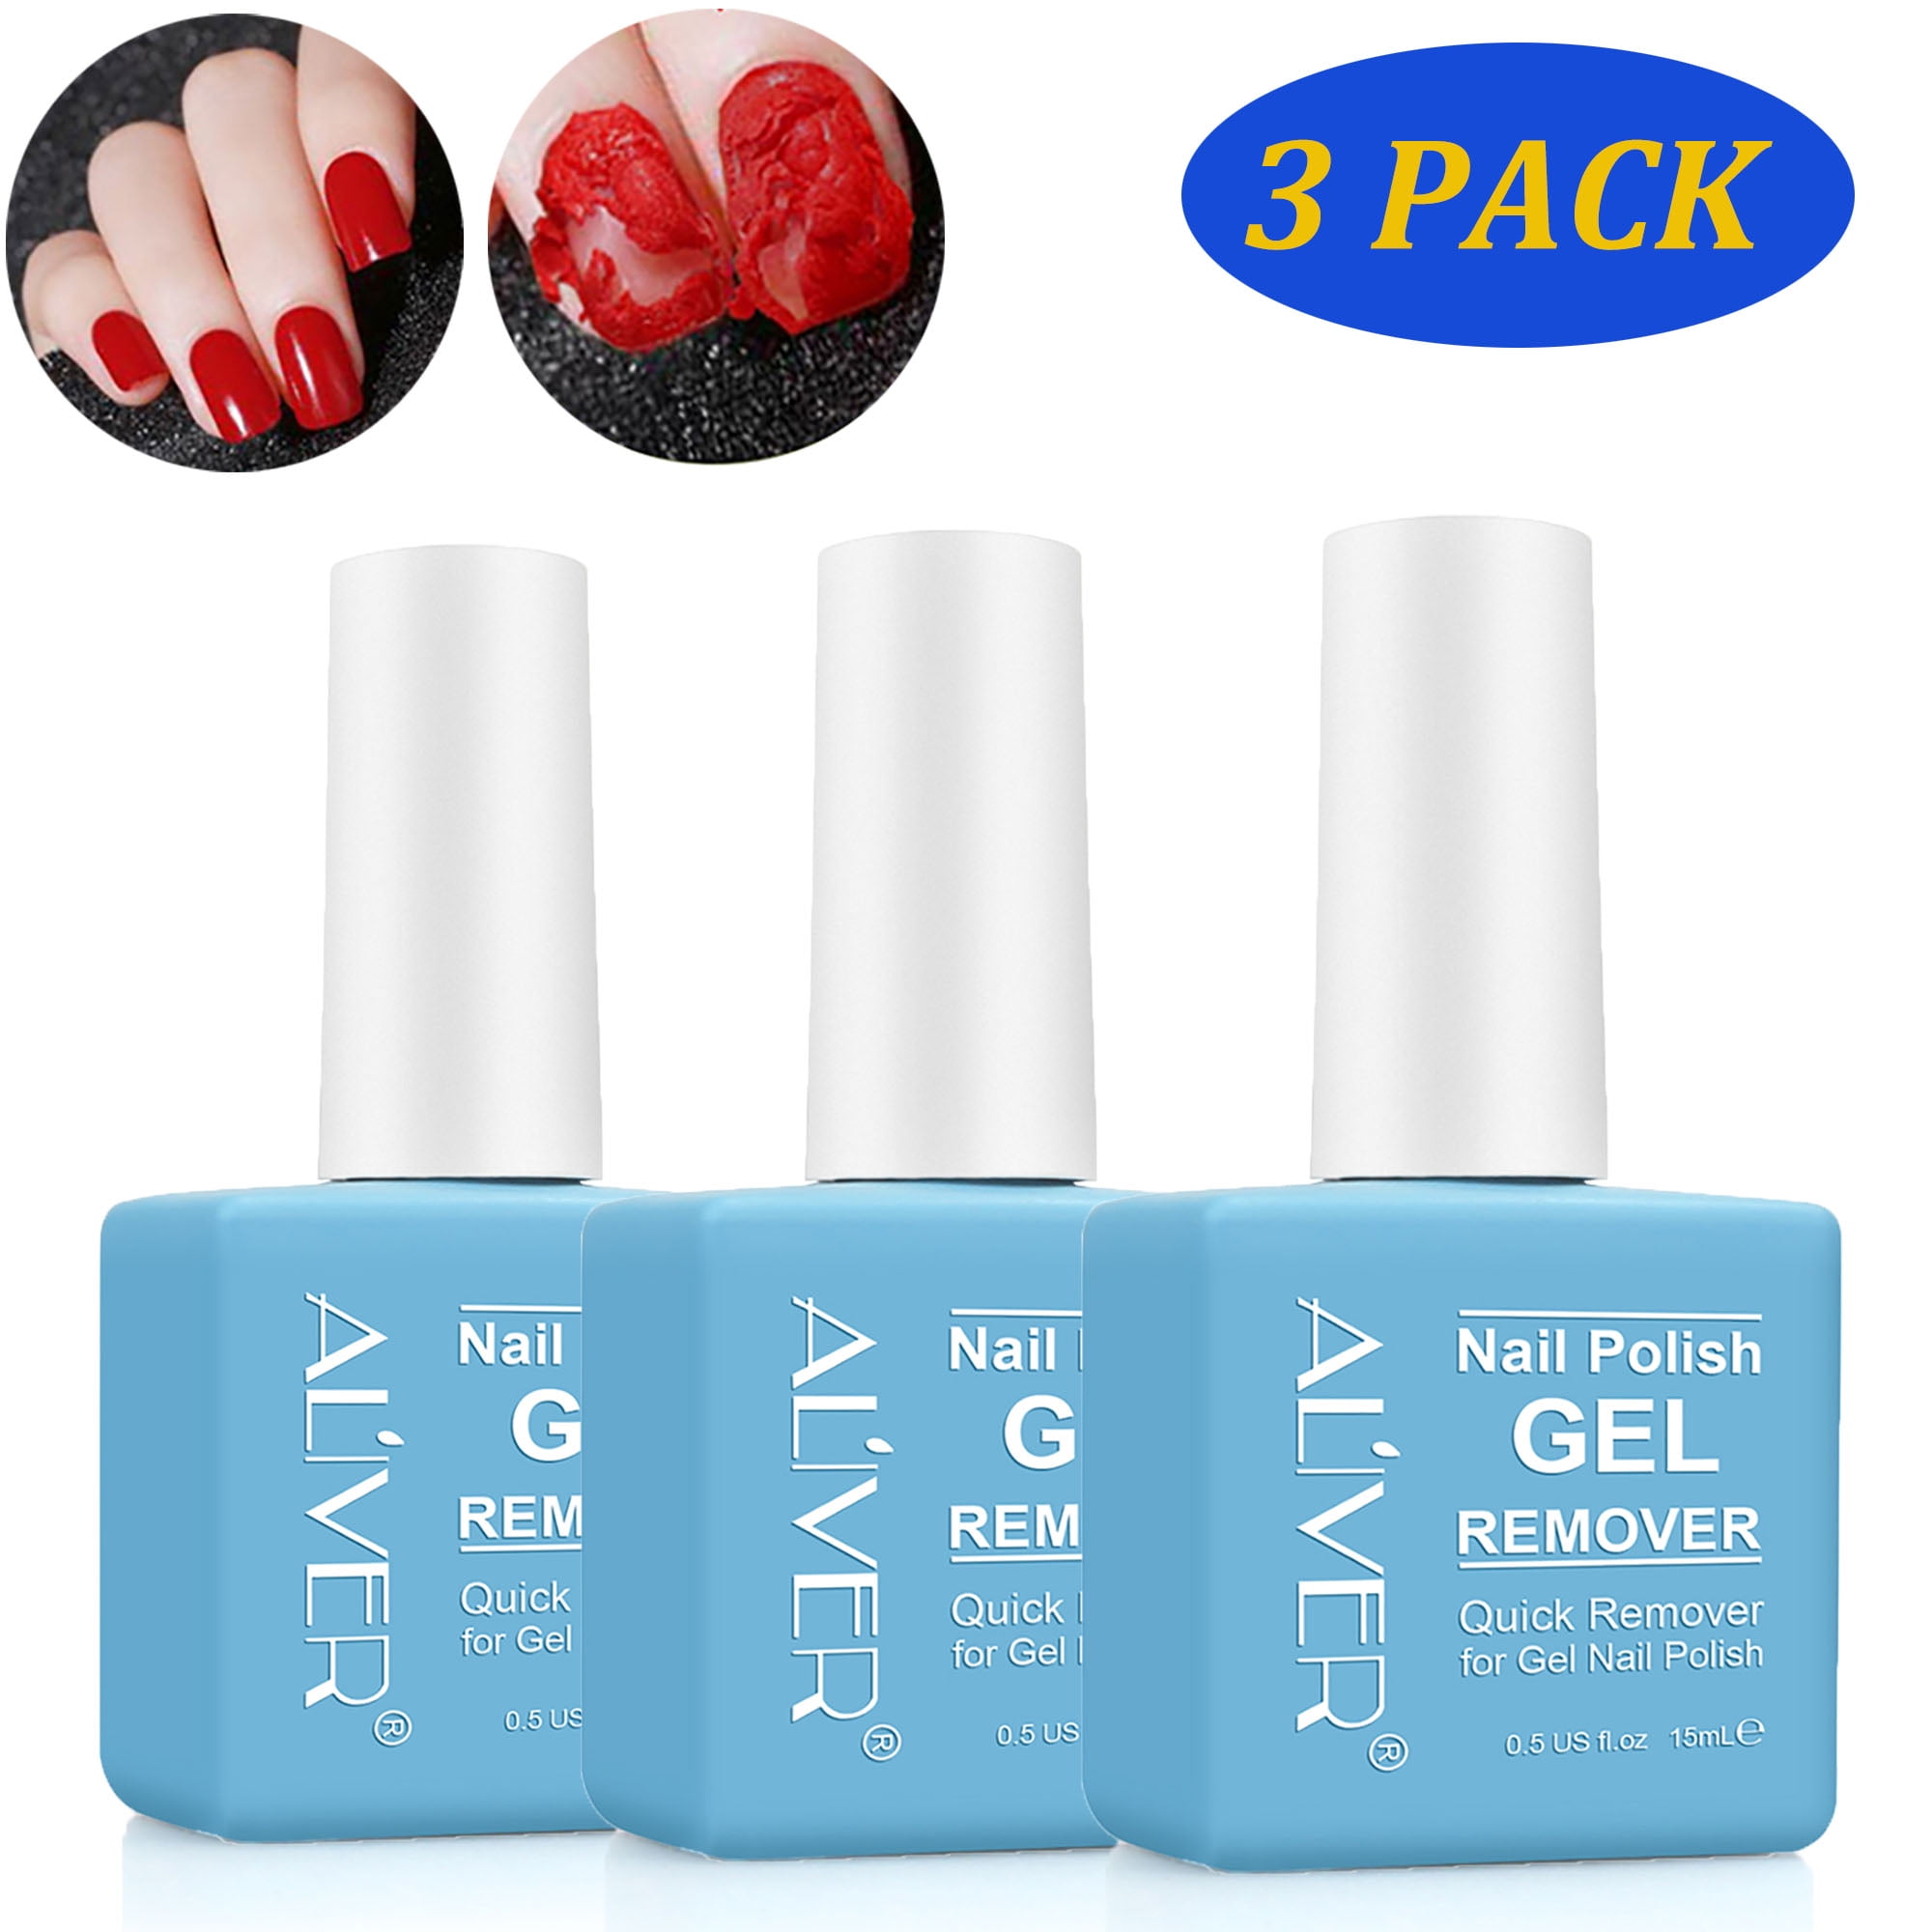 Aliver Gel Nail Polish Remover 3 Pack,Quick Remover for Nail Gel Polish ...